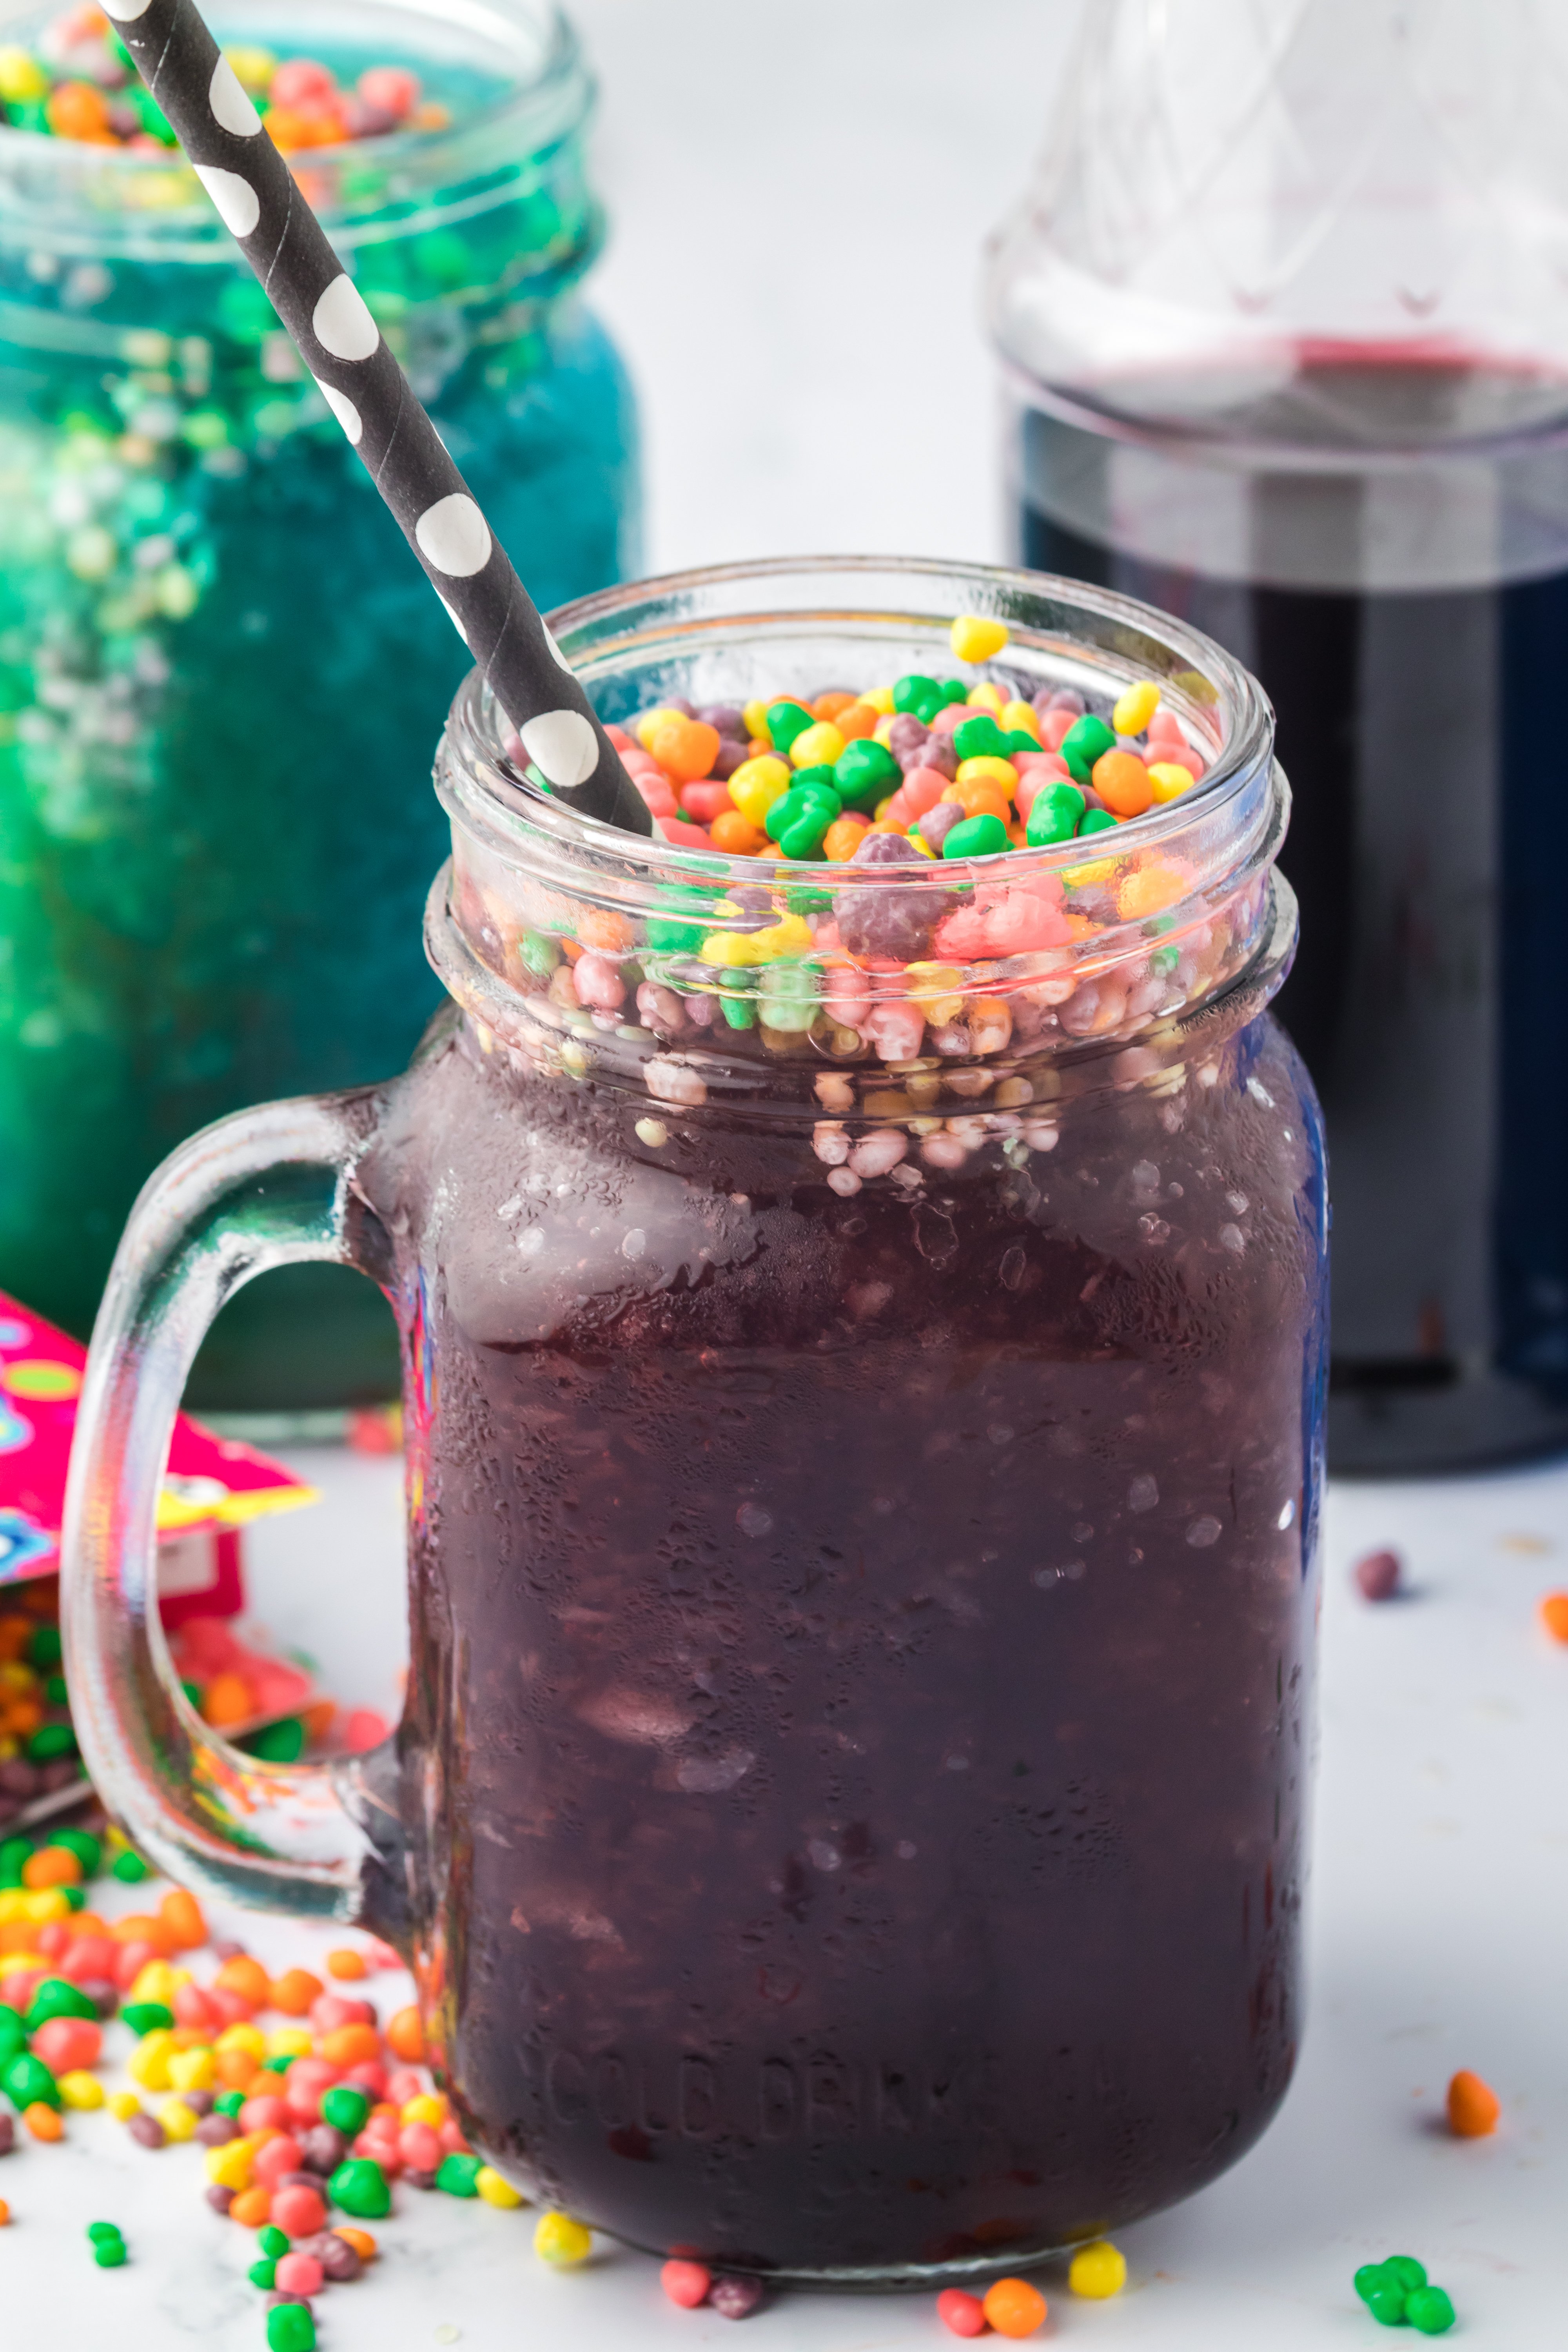 Pour the Slushie into a glass, and garnish with Nerds.